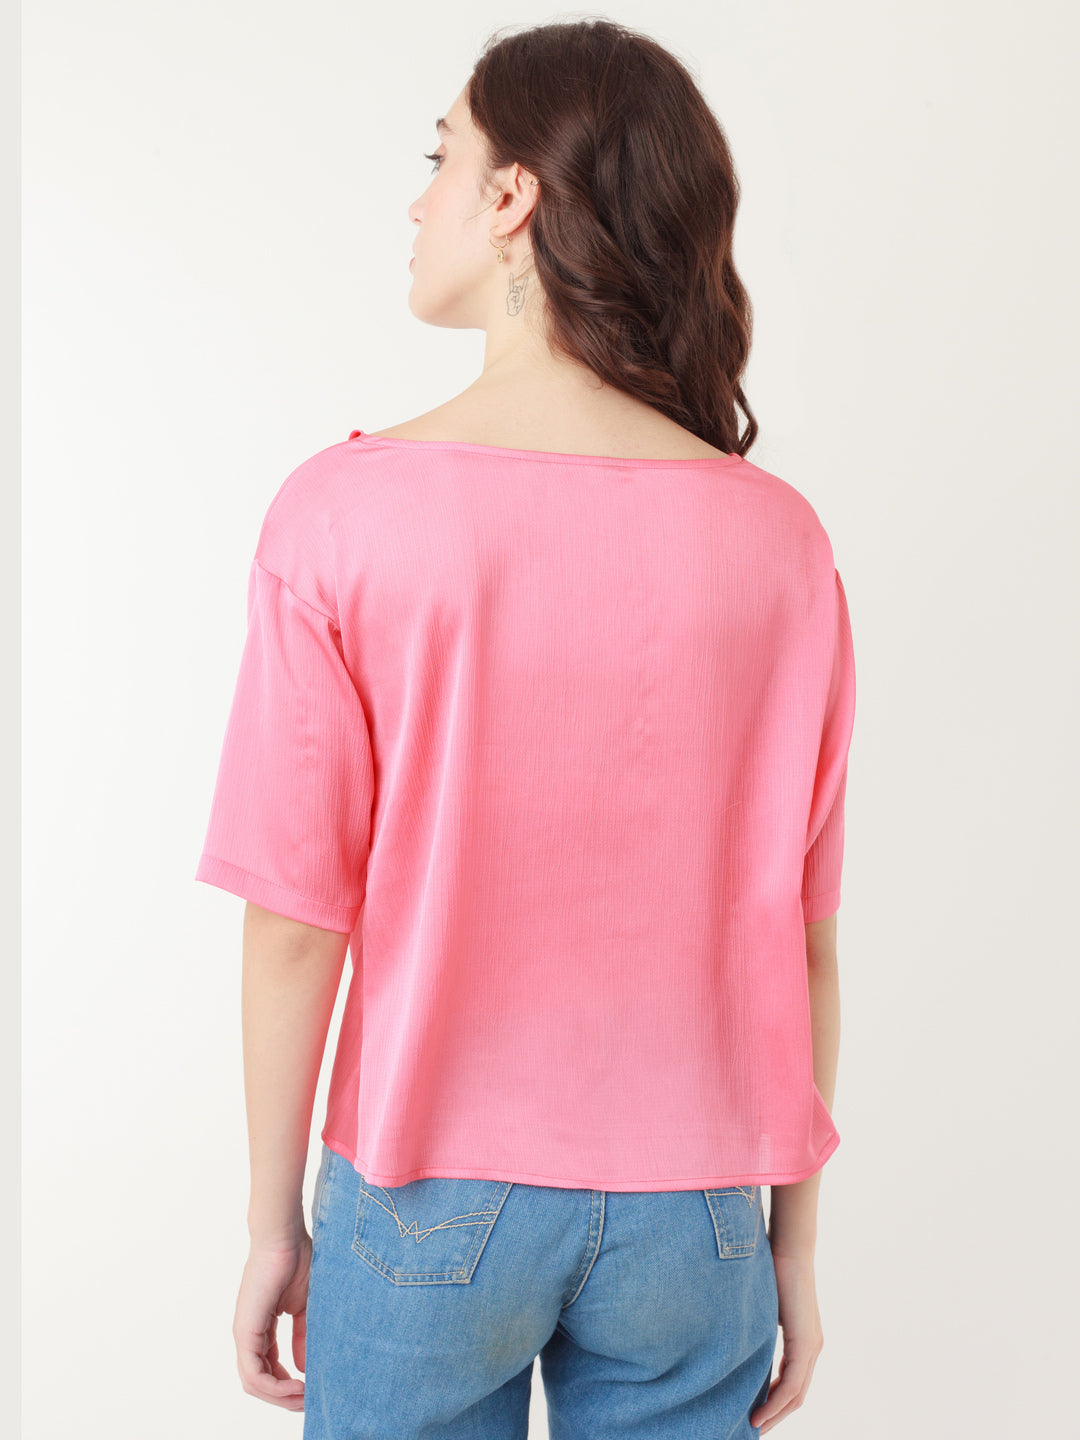 Coral Solid Regular Top For Women